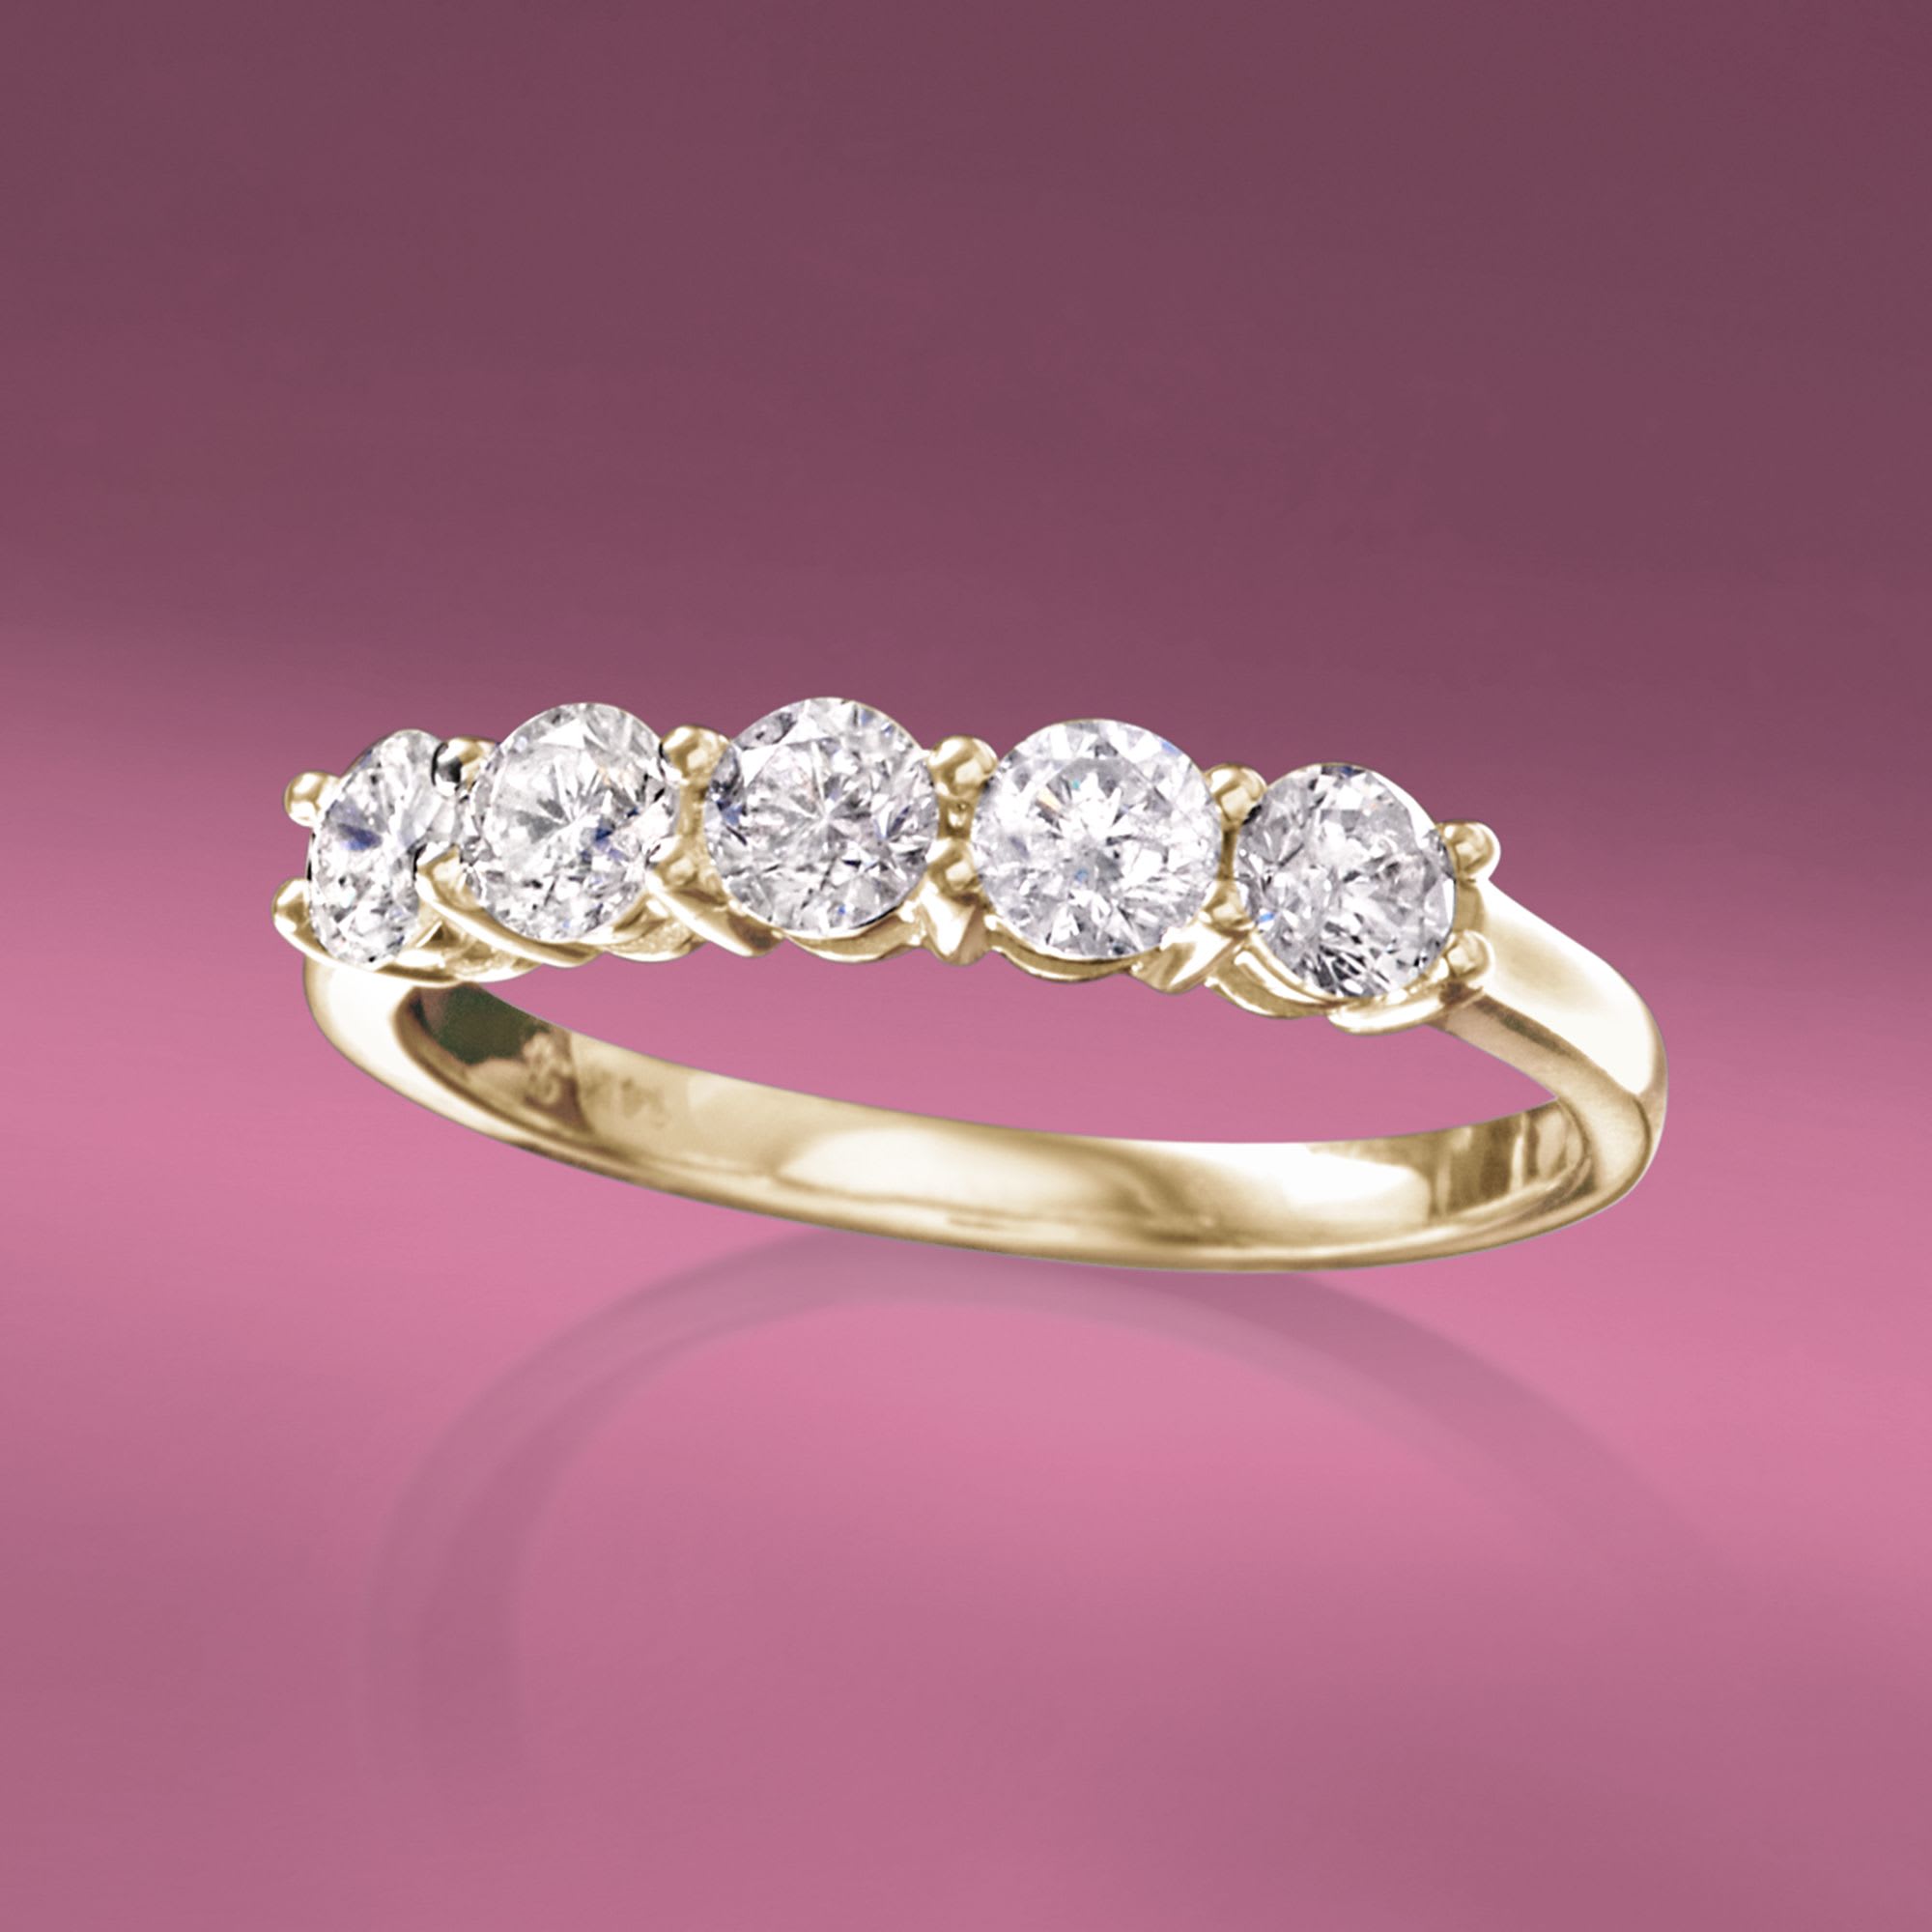 1.00 ct. t.w. Diamond Five-Stone Ring in 14kt Yellow Gold | Ross-Simons